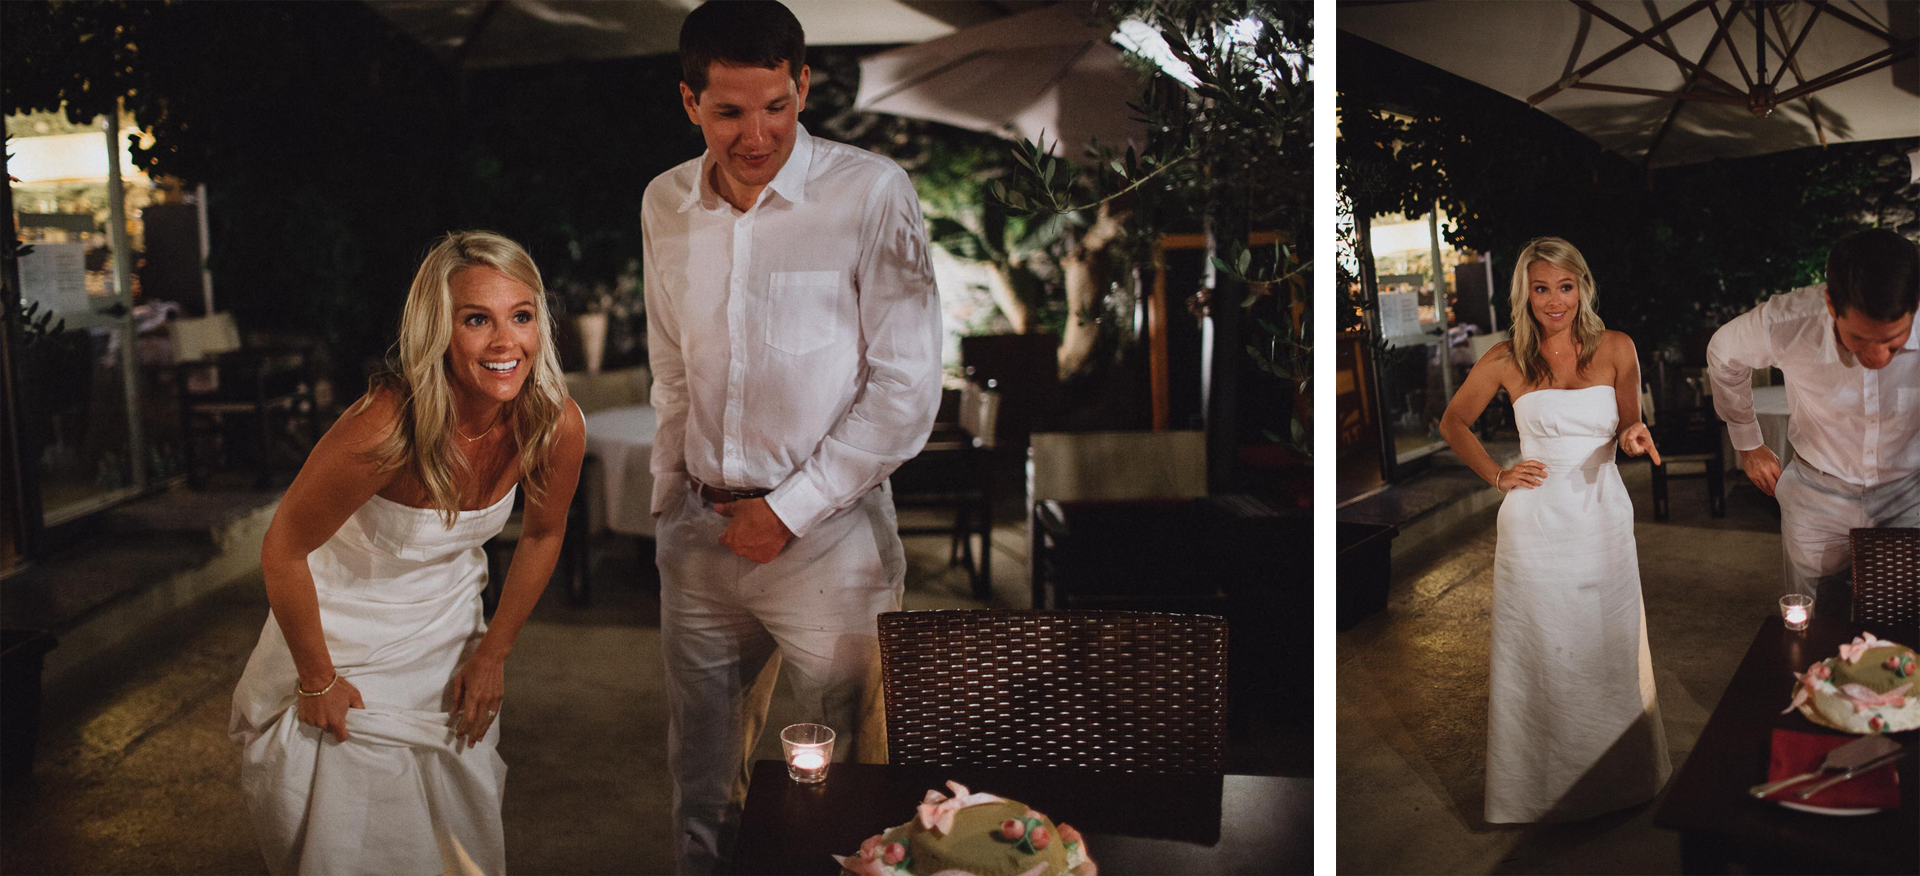 Kristy-Seth-Italy-Elopement-146@2x.png